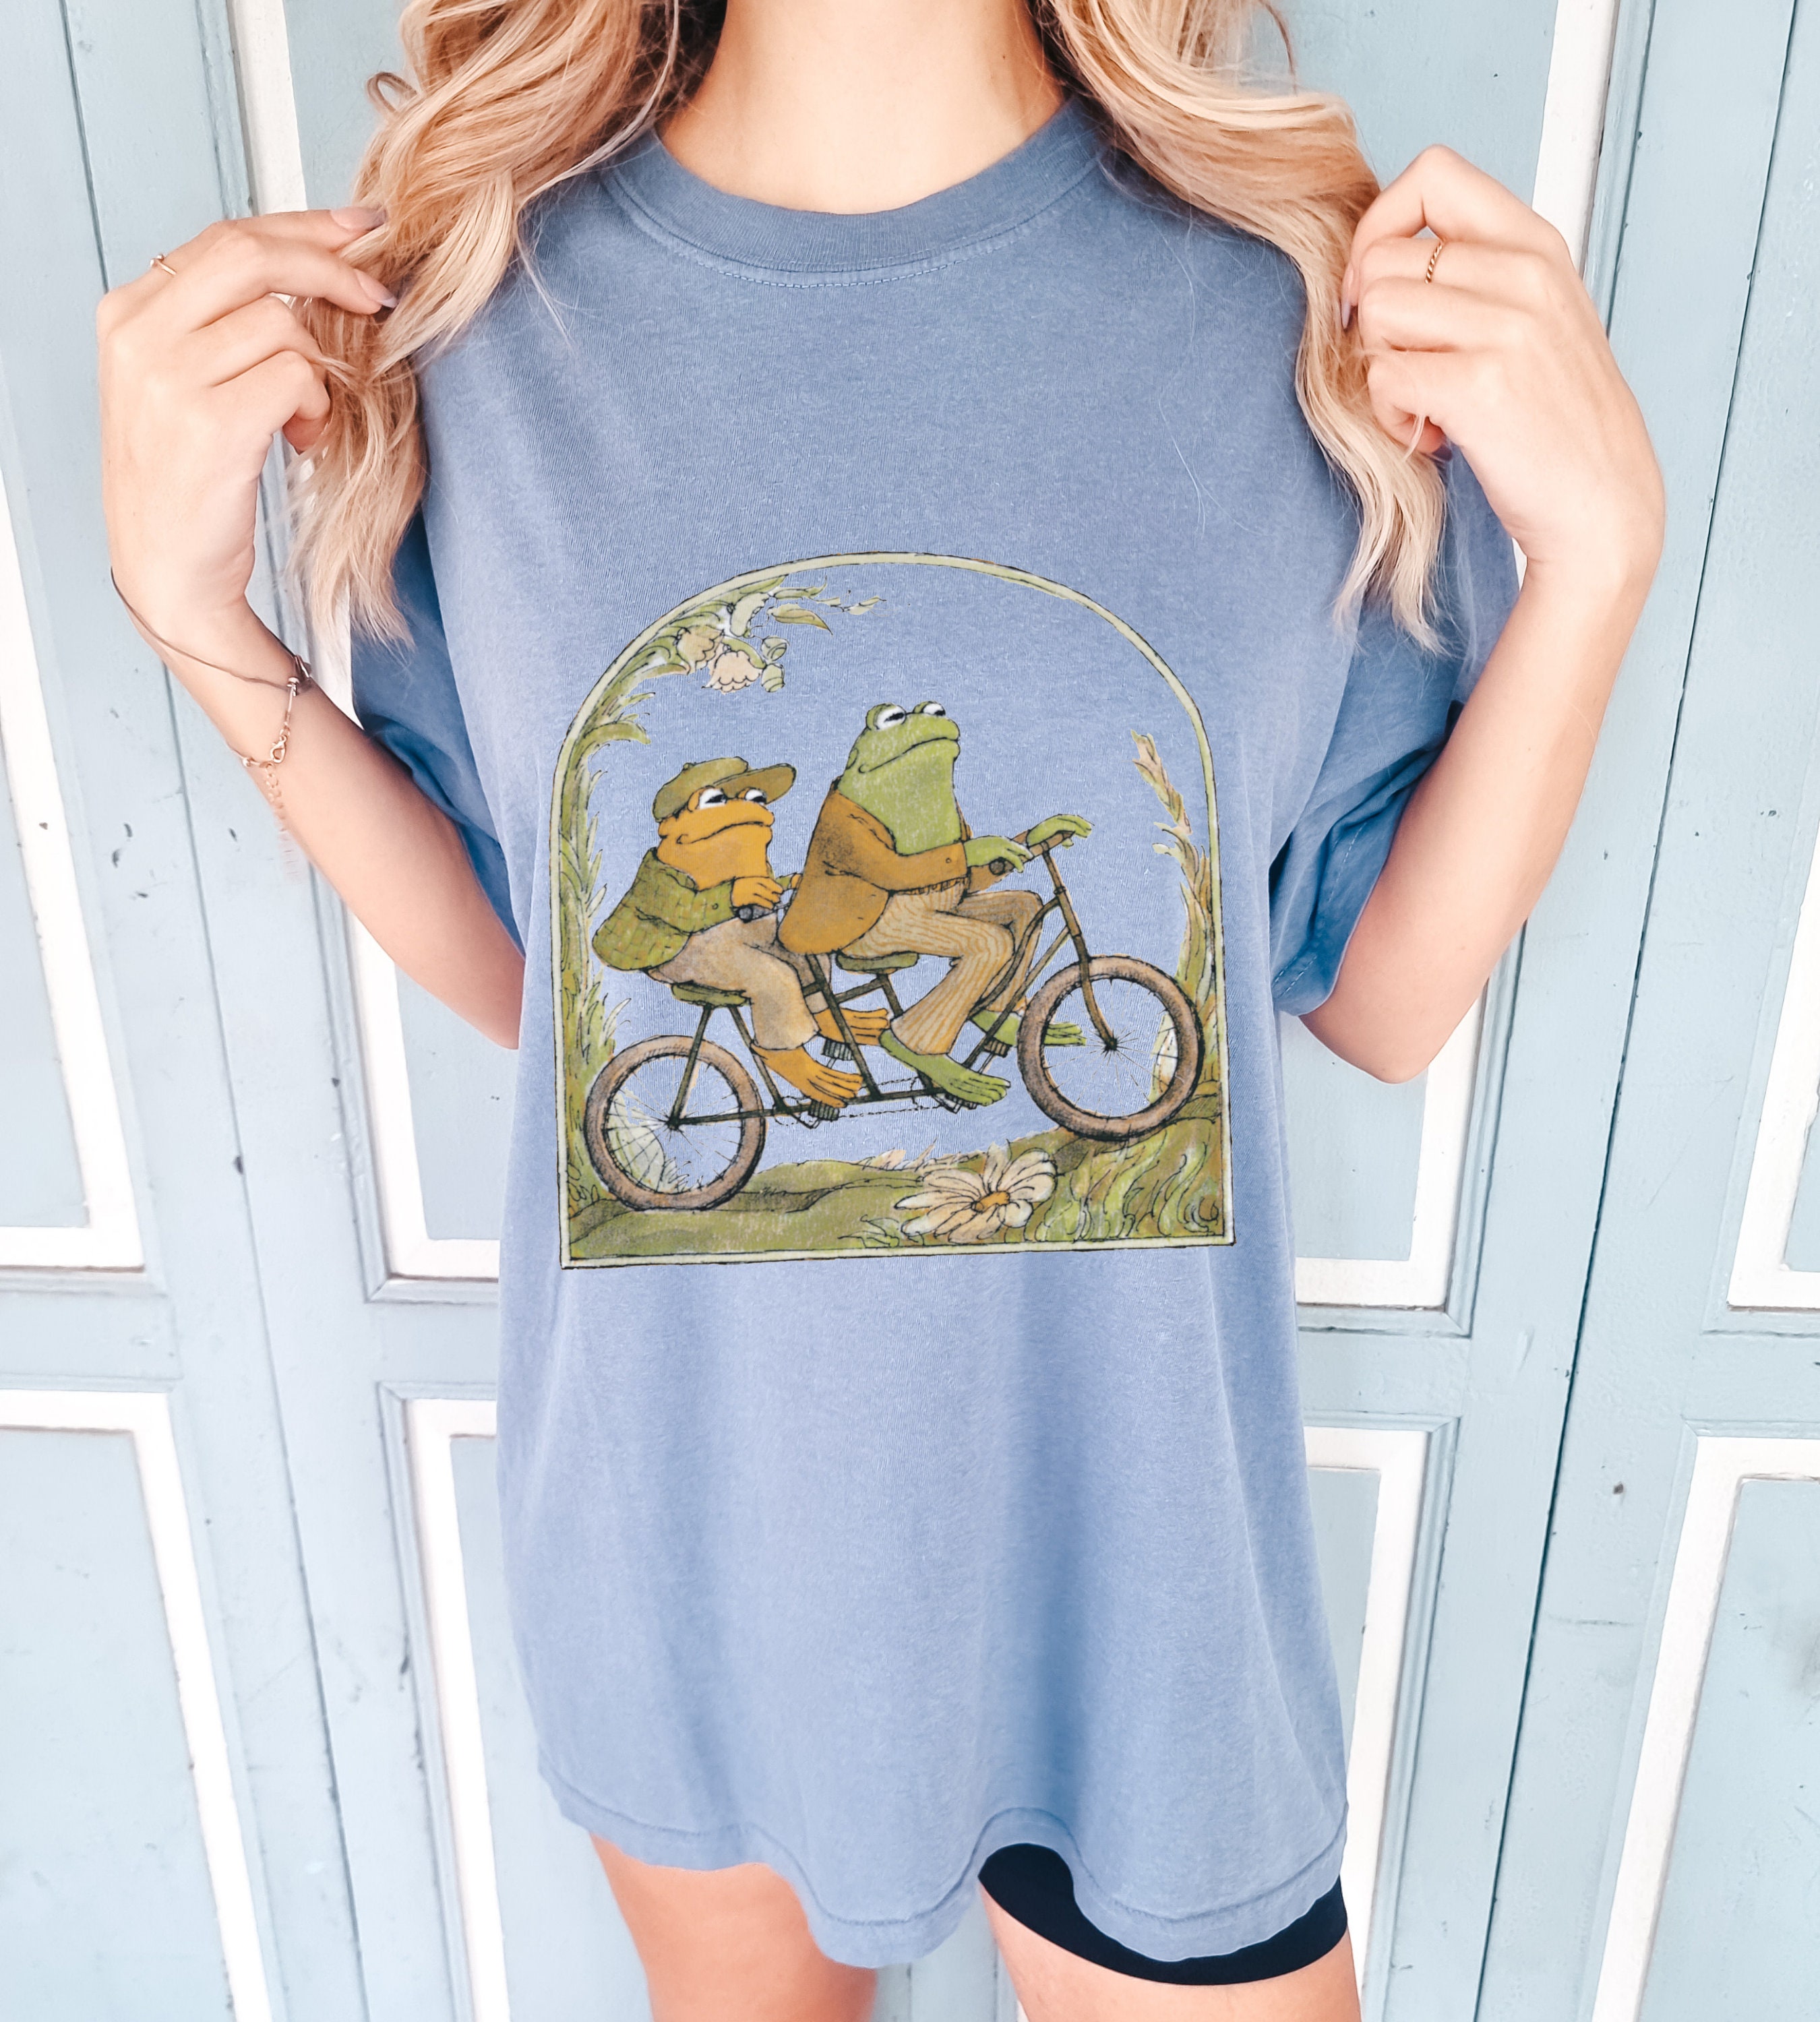 Frog and Toad Shirt-Vintage Classic-Gifts for Readers-Animal Tshirts- Cottagecore Aesthetic Tee Shirts-Book Series Shirt